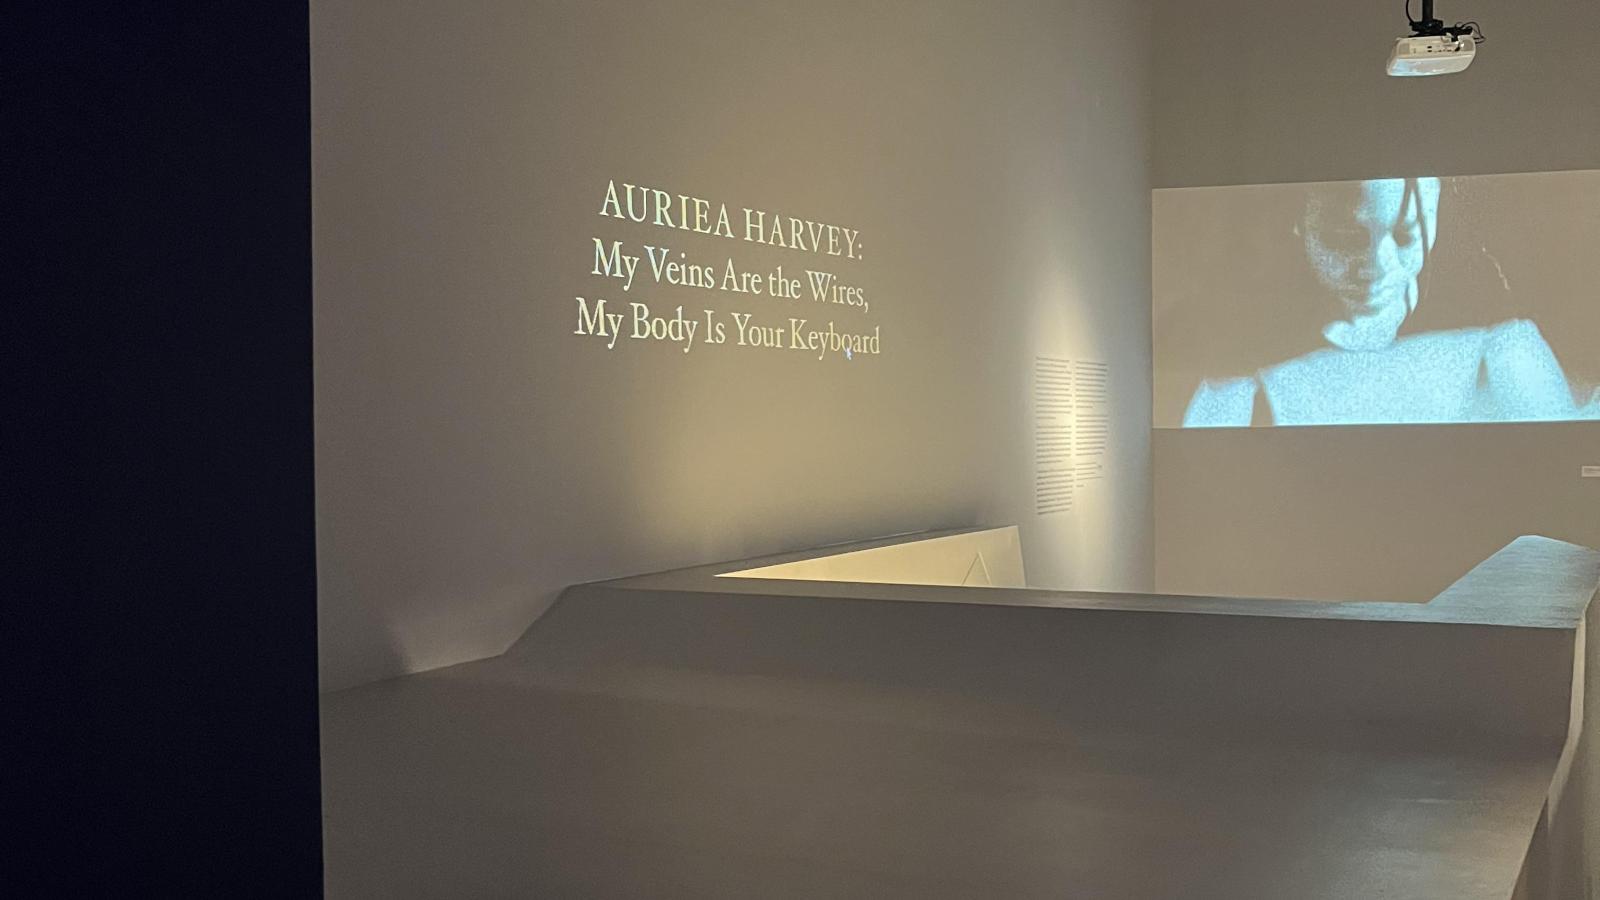 Exhibition view of Auriea Harvey: My Veins Are the Wires, My Body Is Your Keyboard